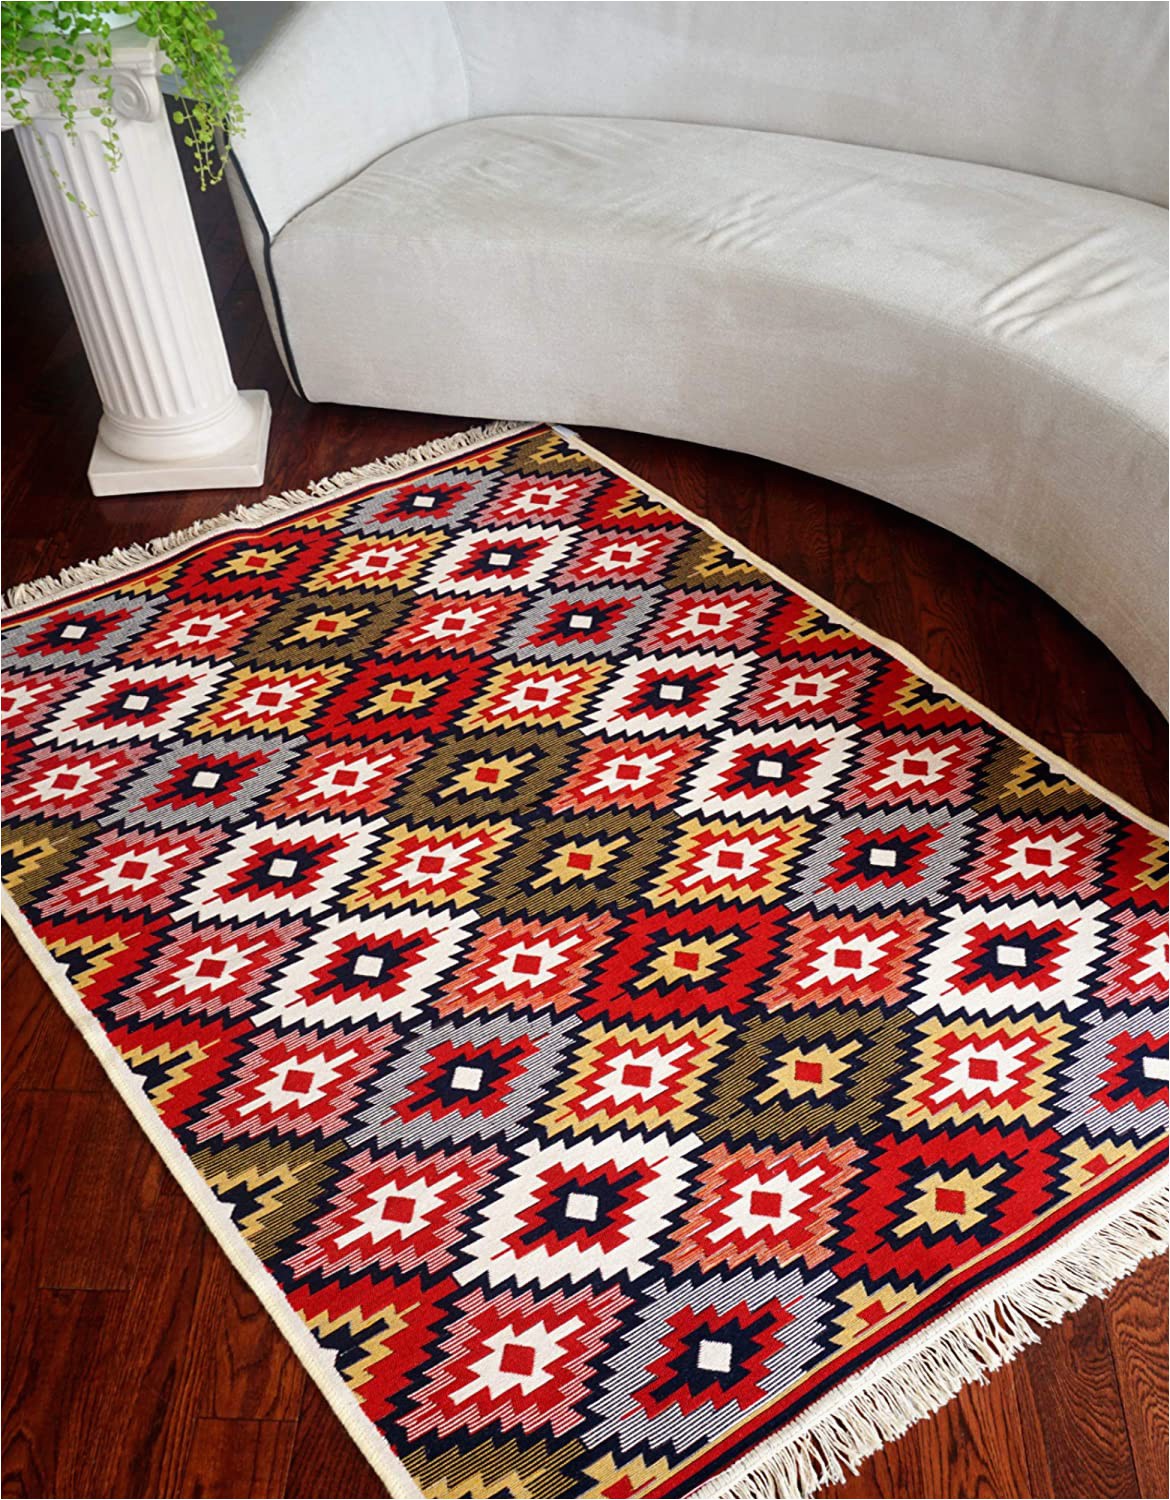 Double Sided Bath Rugs Boho Rugs for Living Room Machine Washable Double Sided Handwoven Cotton 4×6 Ft